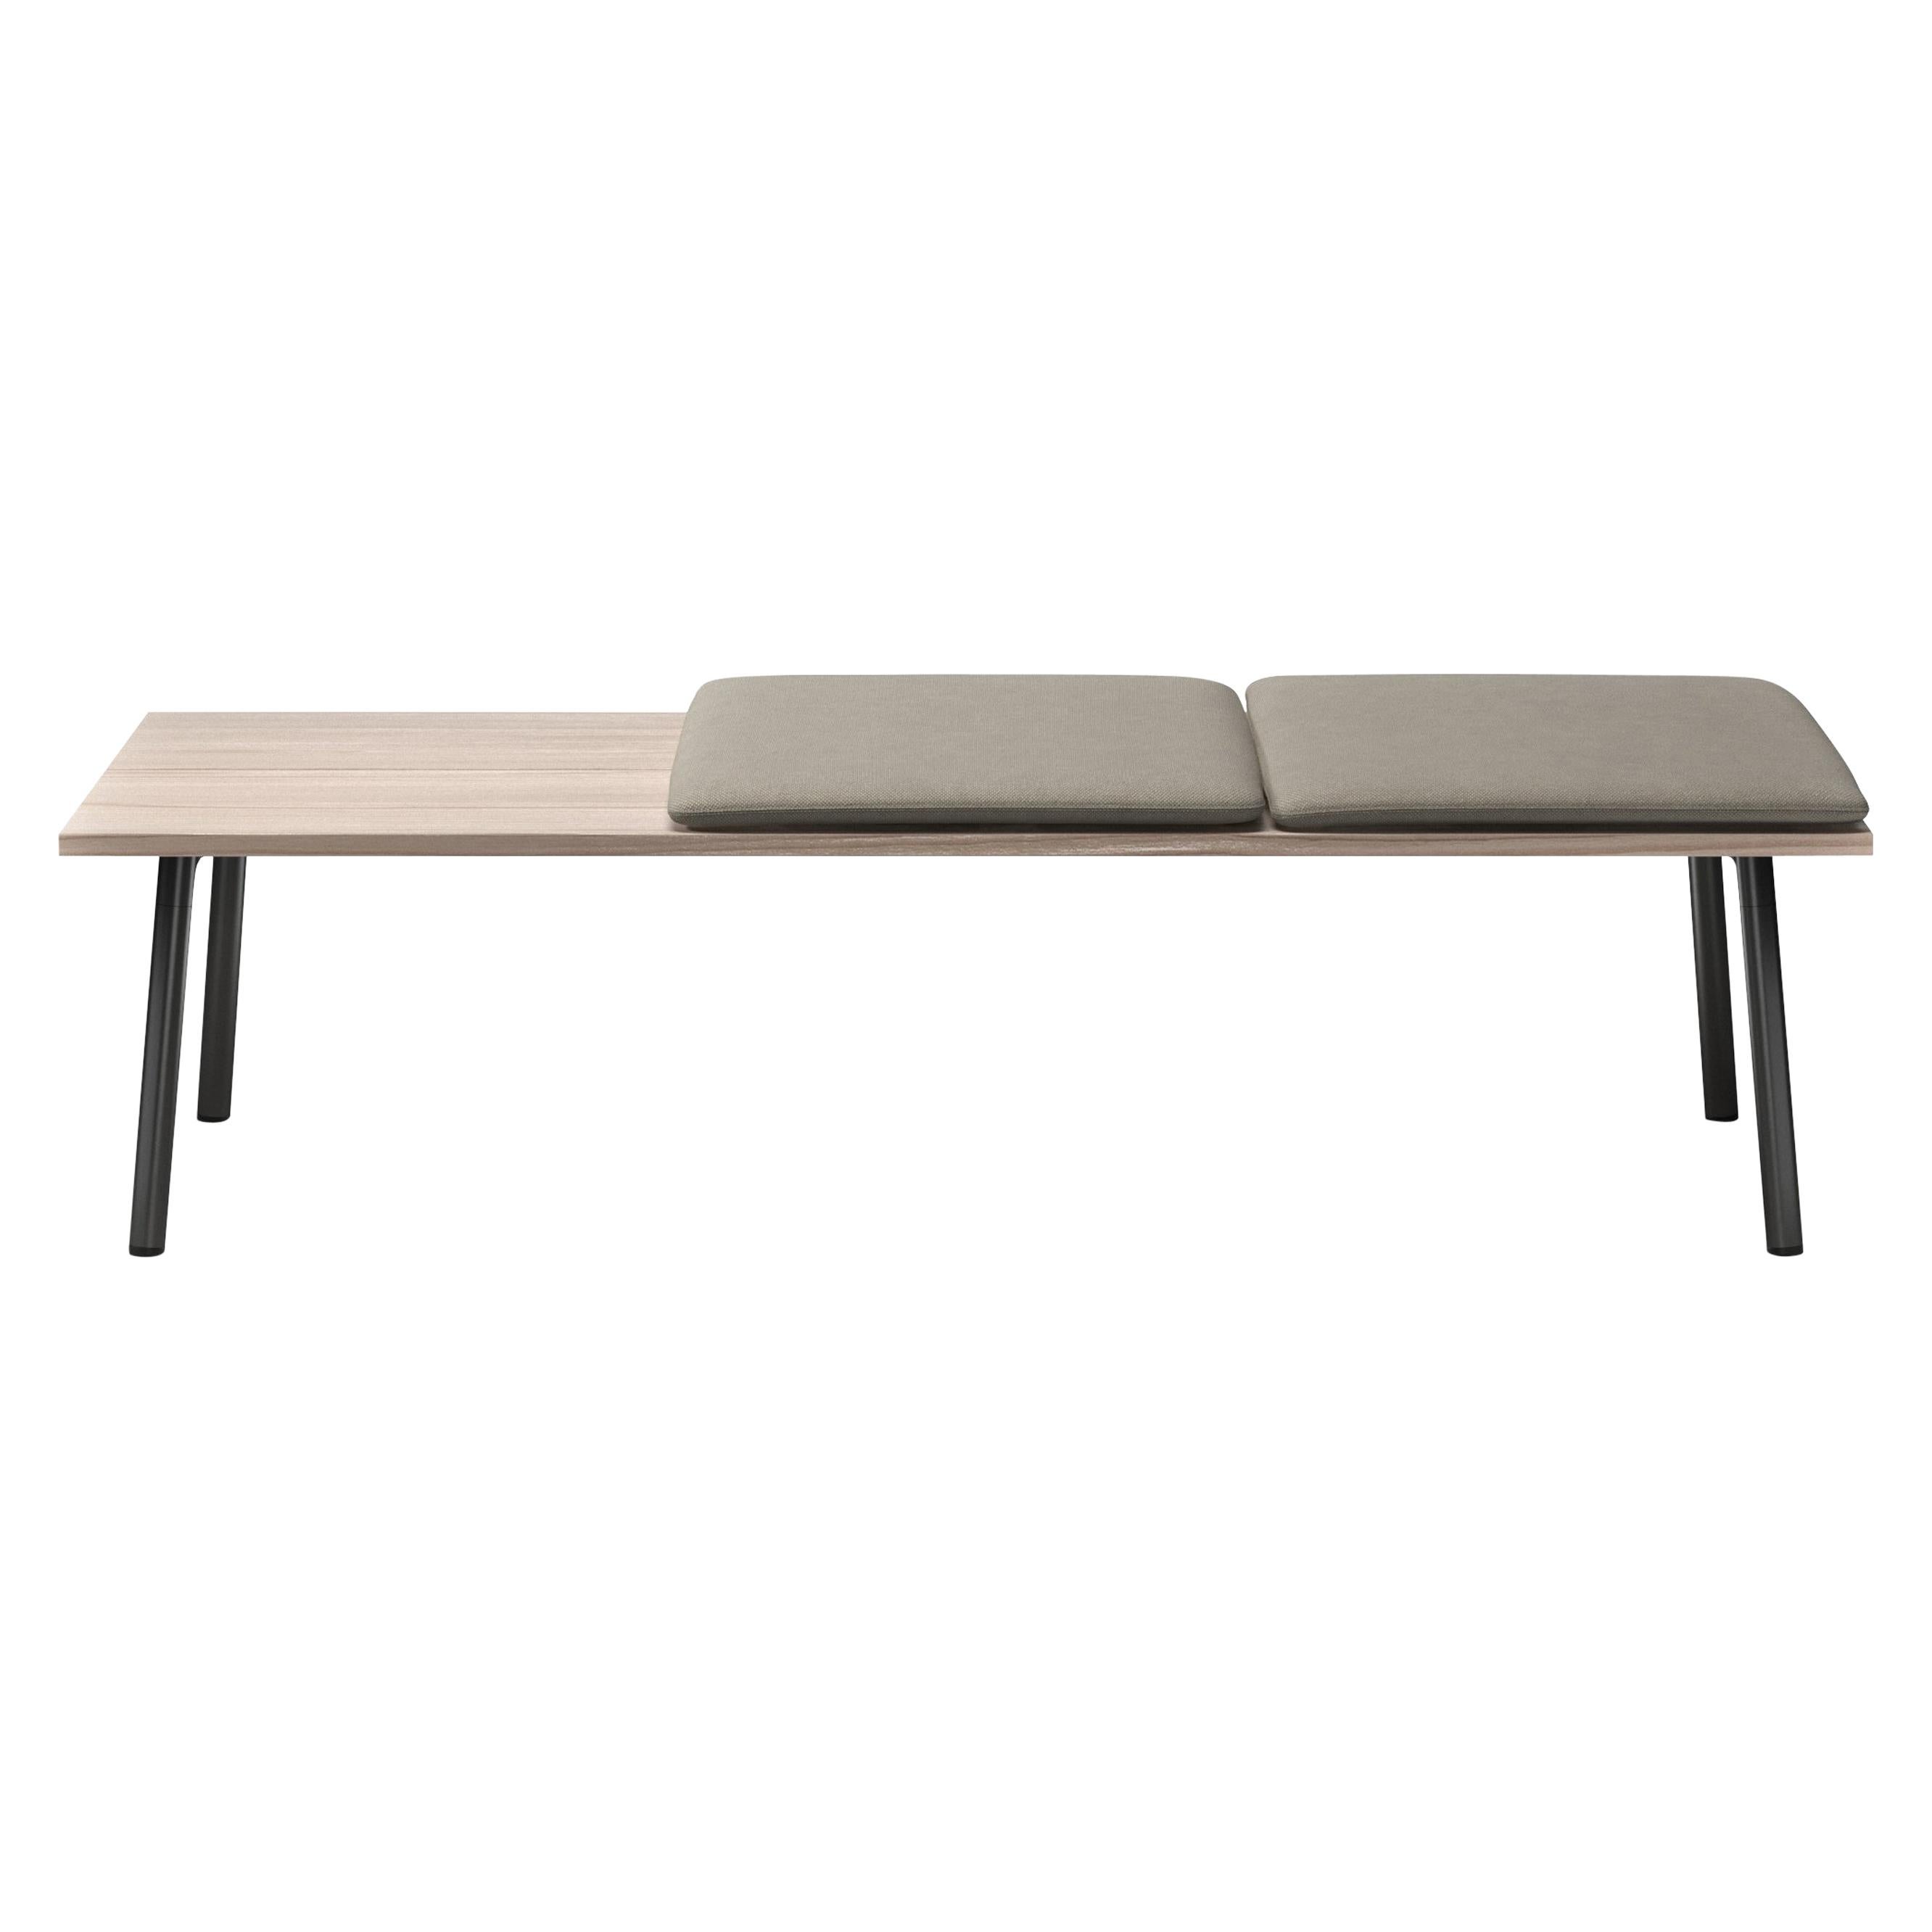 Run Daybed 72" Kvadrat Hallingdal 200 Fabric With Ash Top And Black Aluminum For Sale